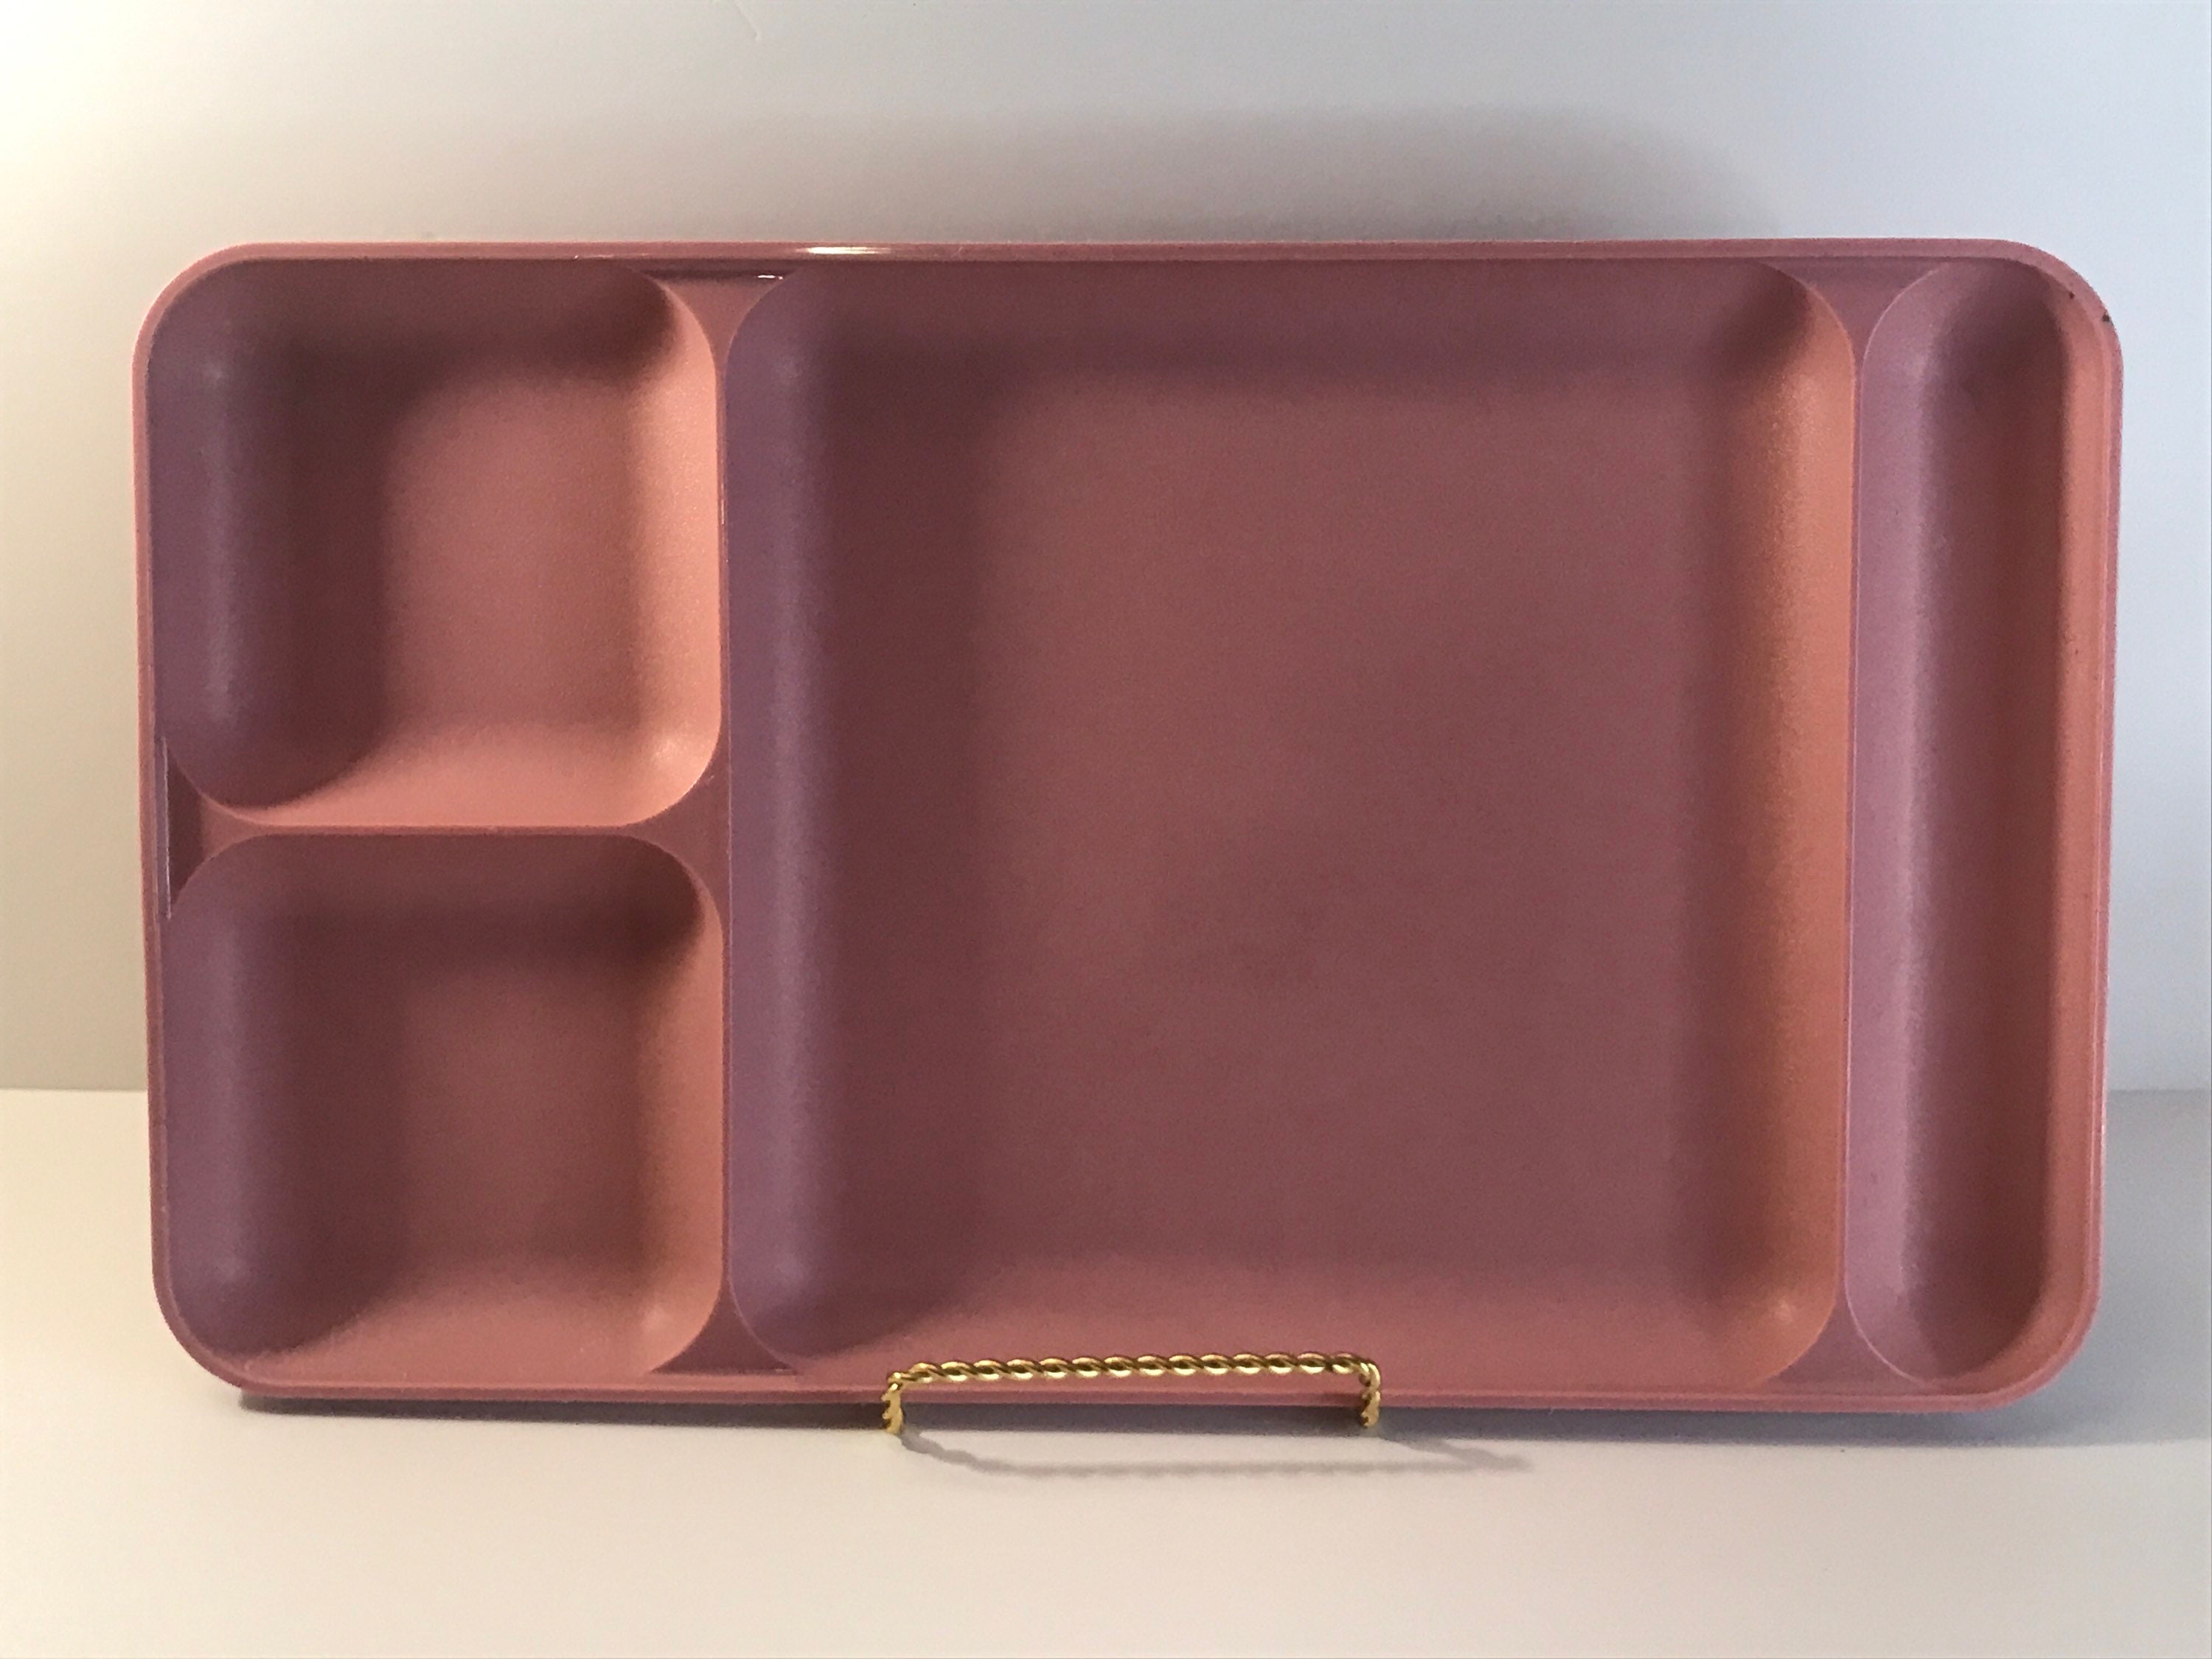 Vintage Cafeteria Trays, School Lunch Trays, Sold Individually, Green,  Pink, Peach, Camping, Picnic, Reunion, Divided Plate 